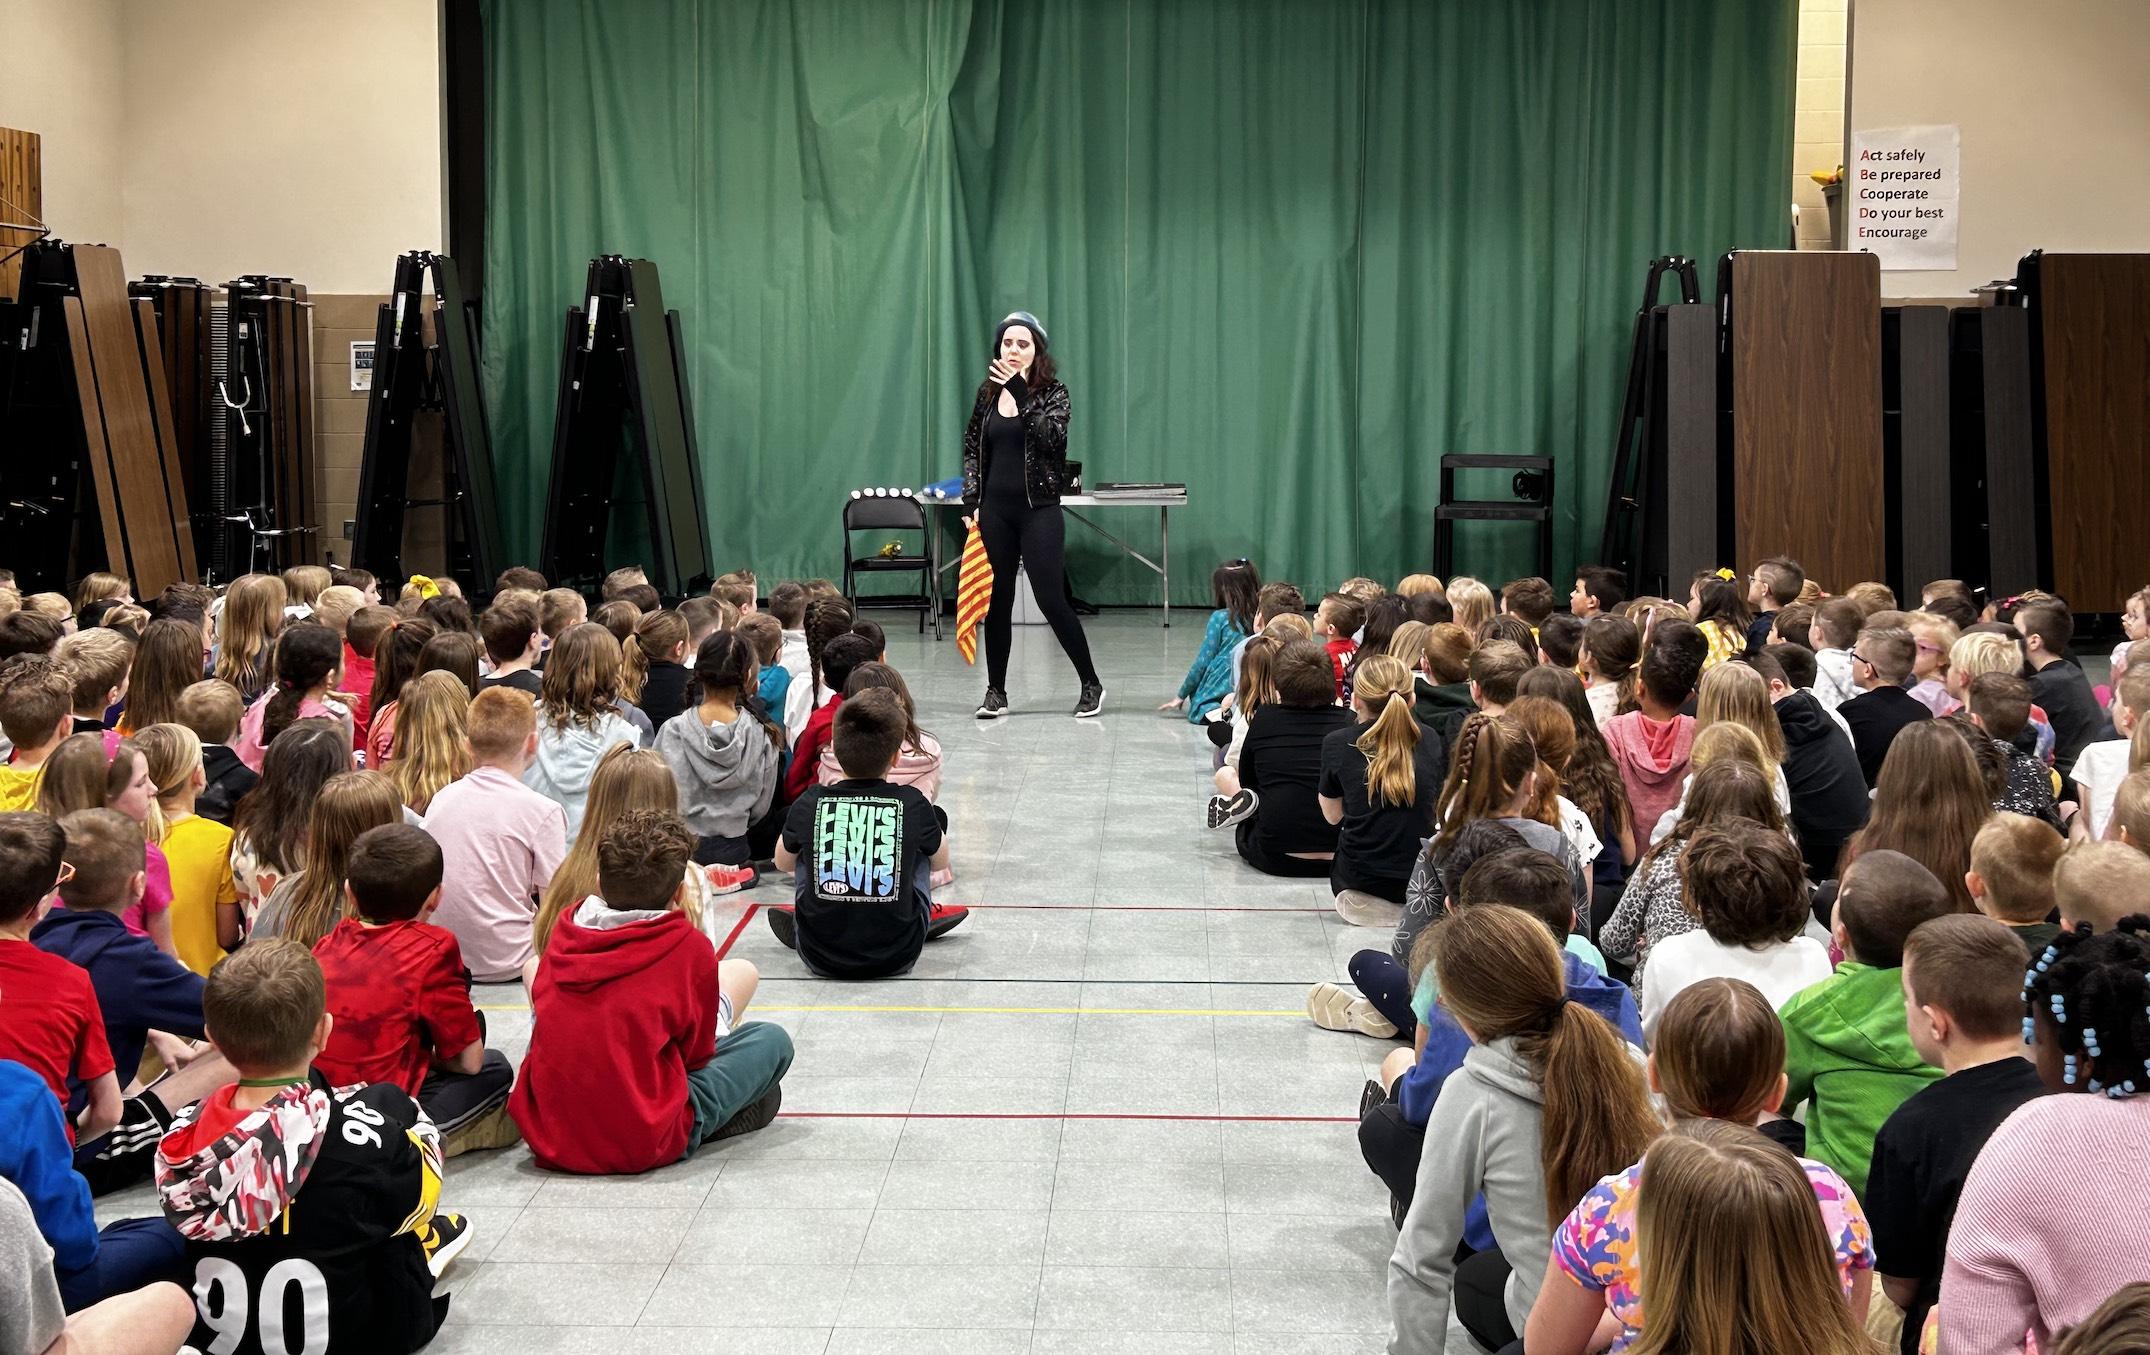 “The Starry Messenger”, Lindsay Surmacz, captivates the students with a circus-themed assembly